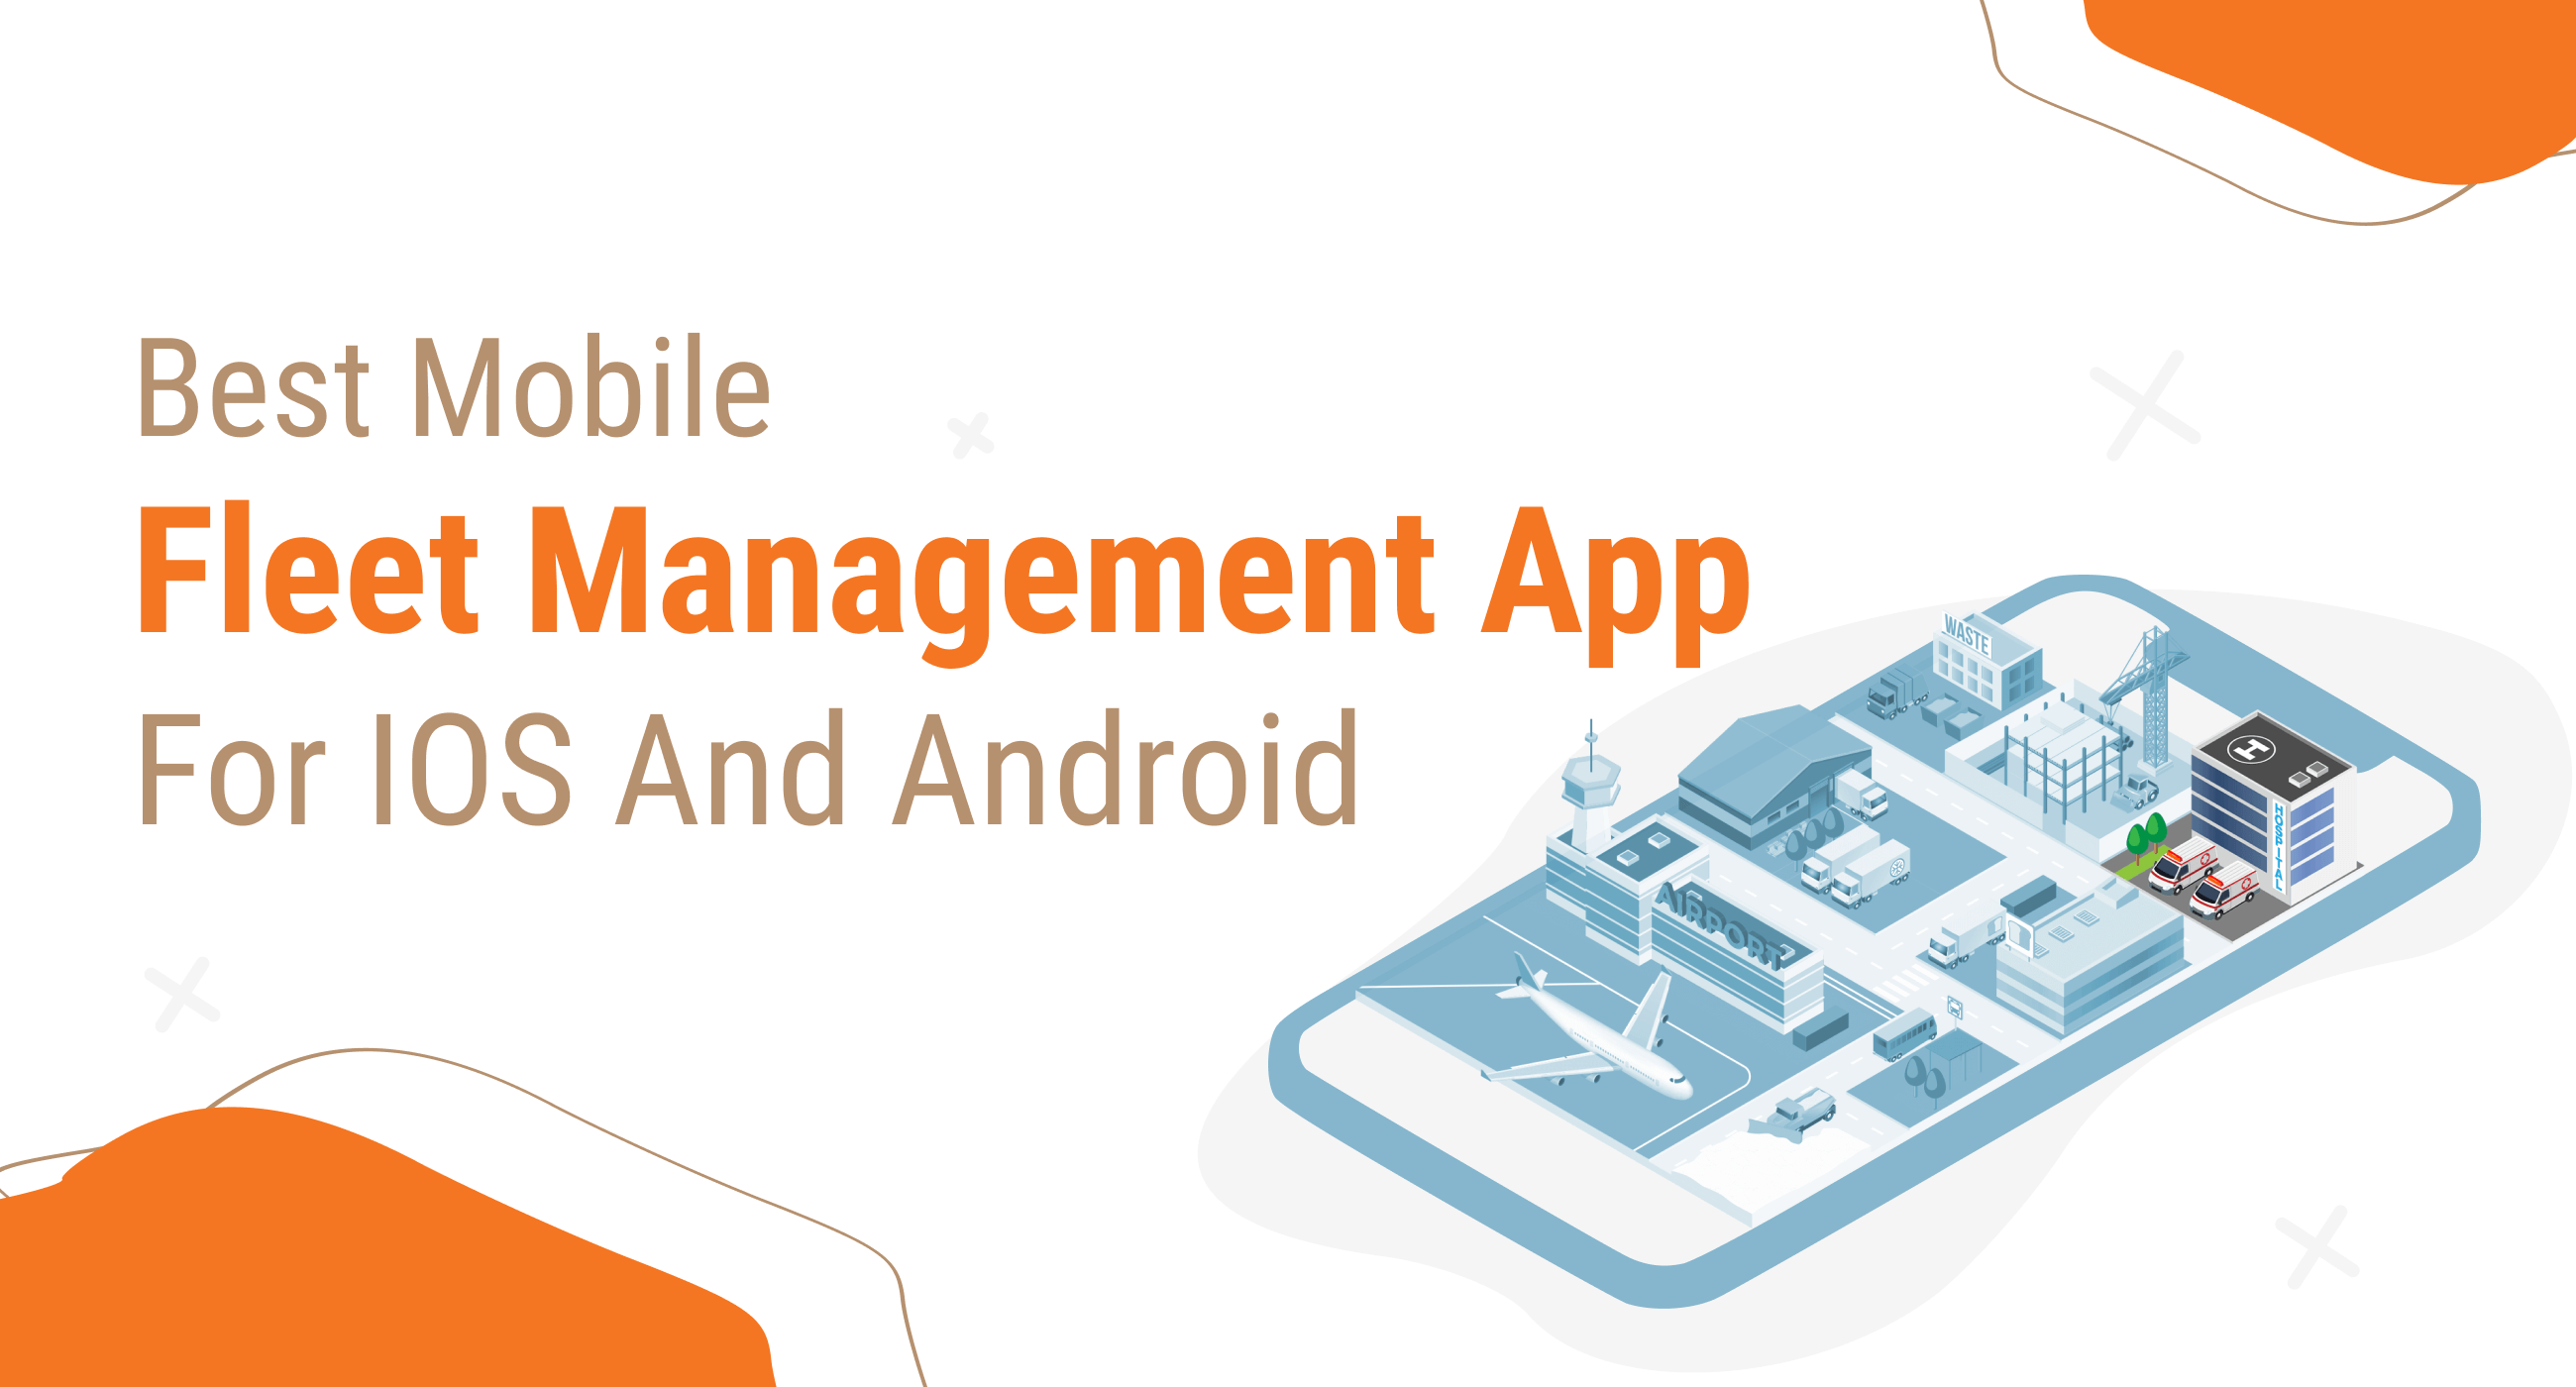 Learn All About the Best Mobile Fleet Management App for IOS and Android